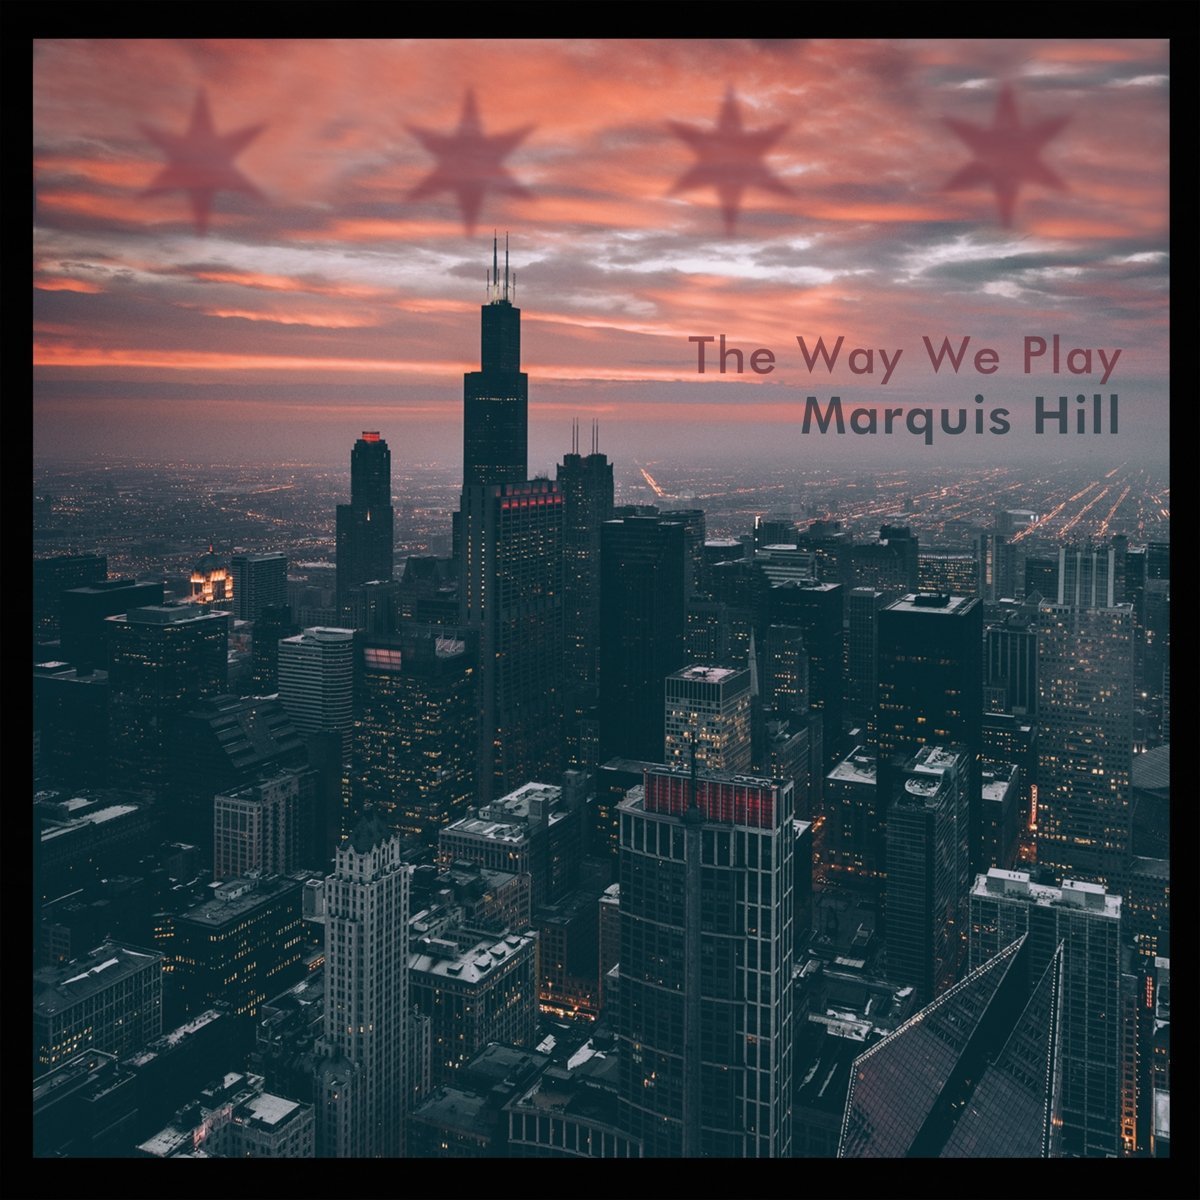 Marquis Hill - The Way We Play (2016) [AcousticSounds FLAC 24bit/44,1kHz]